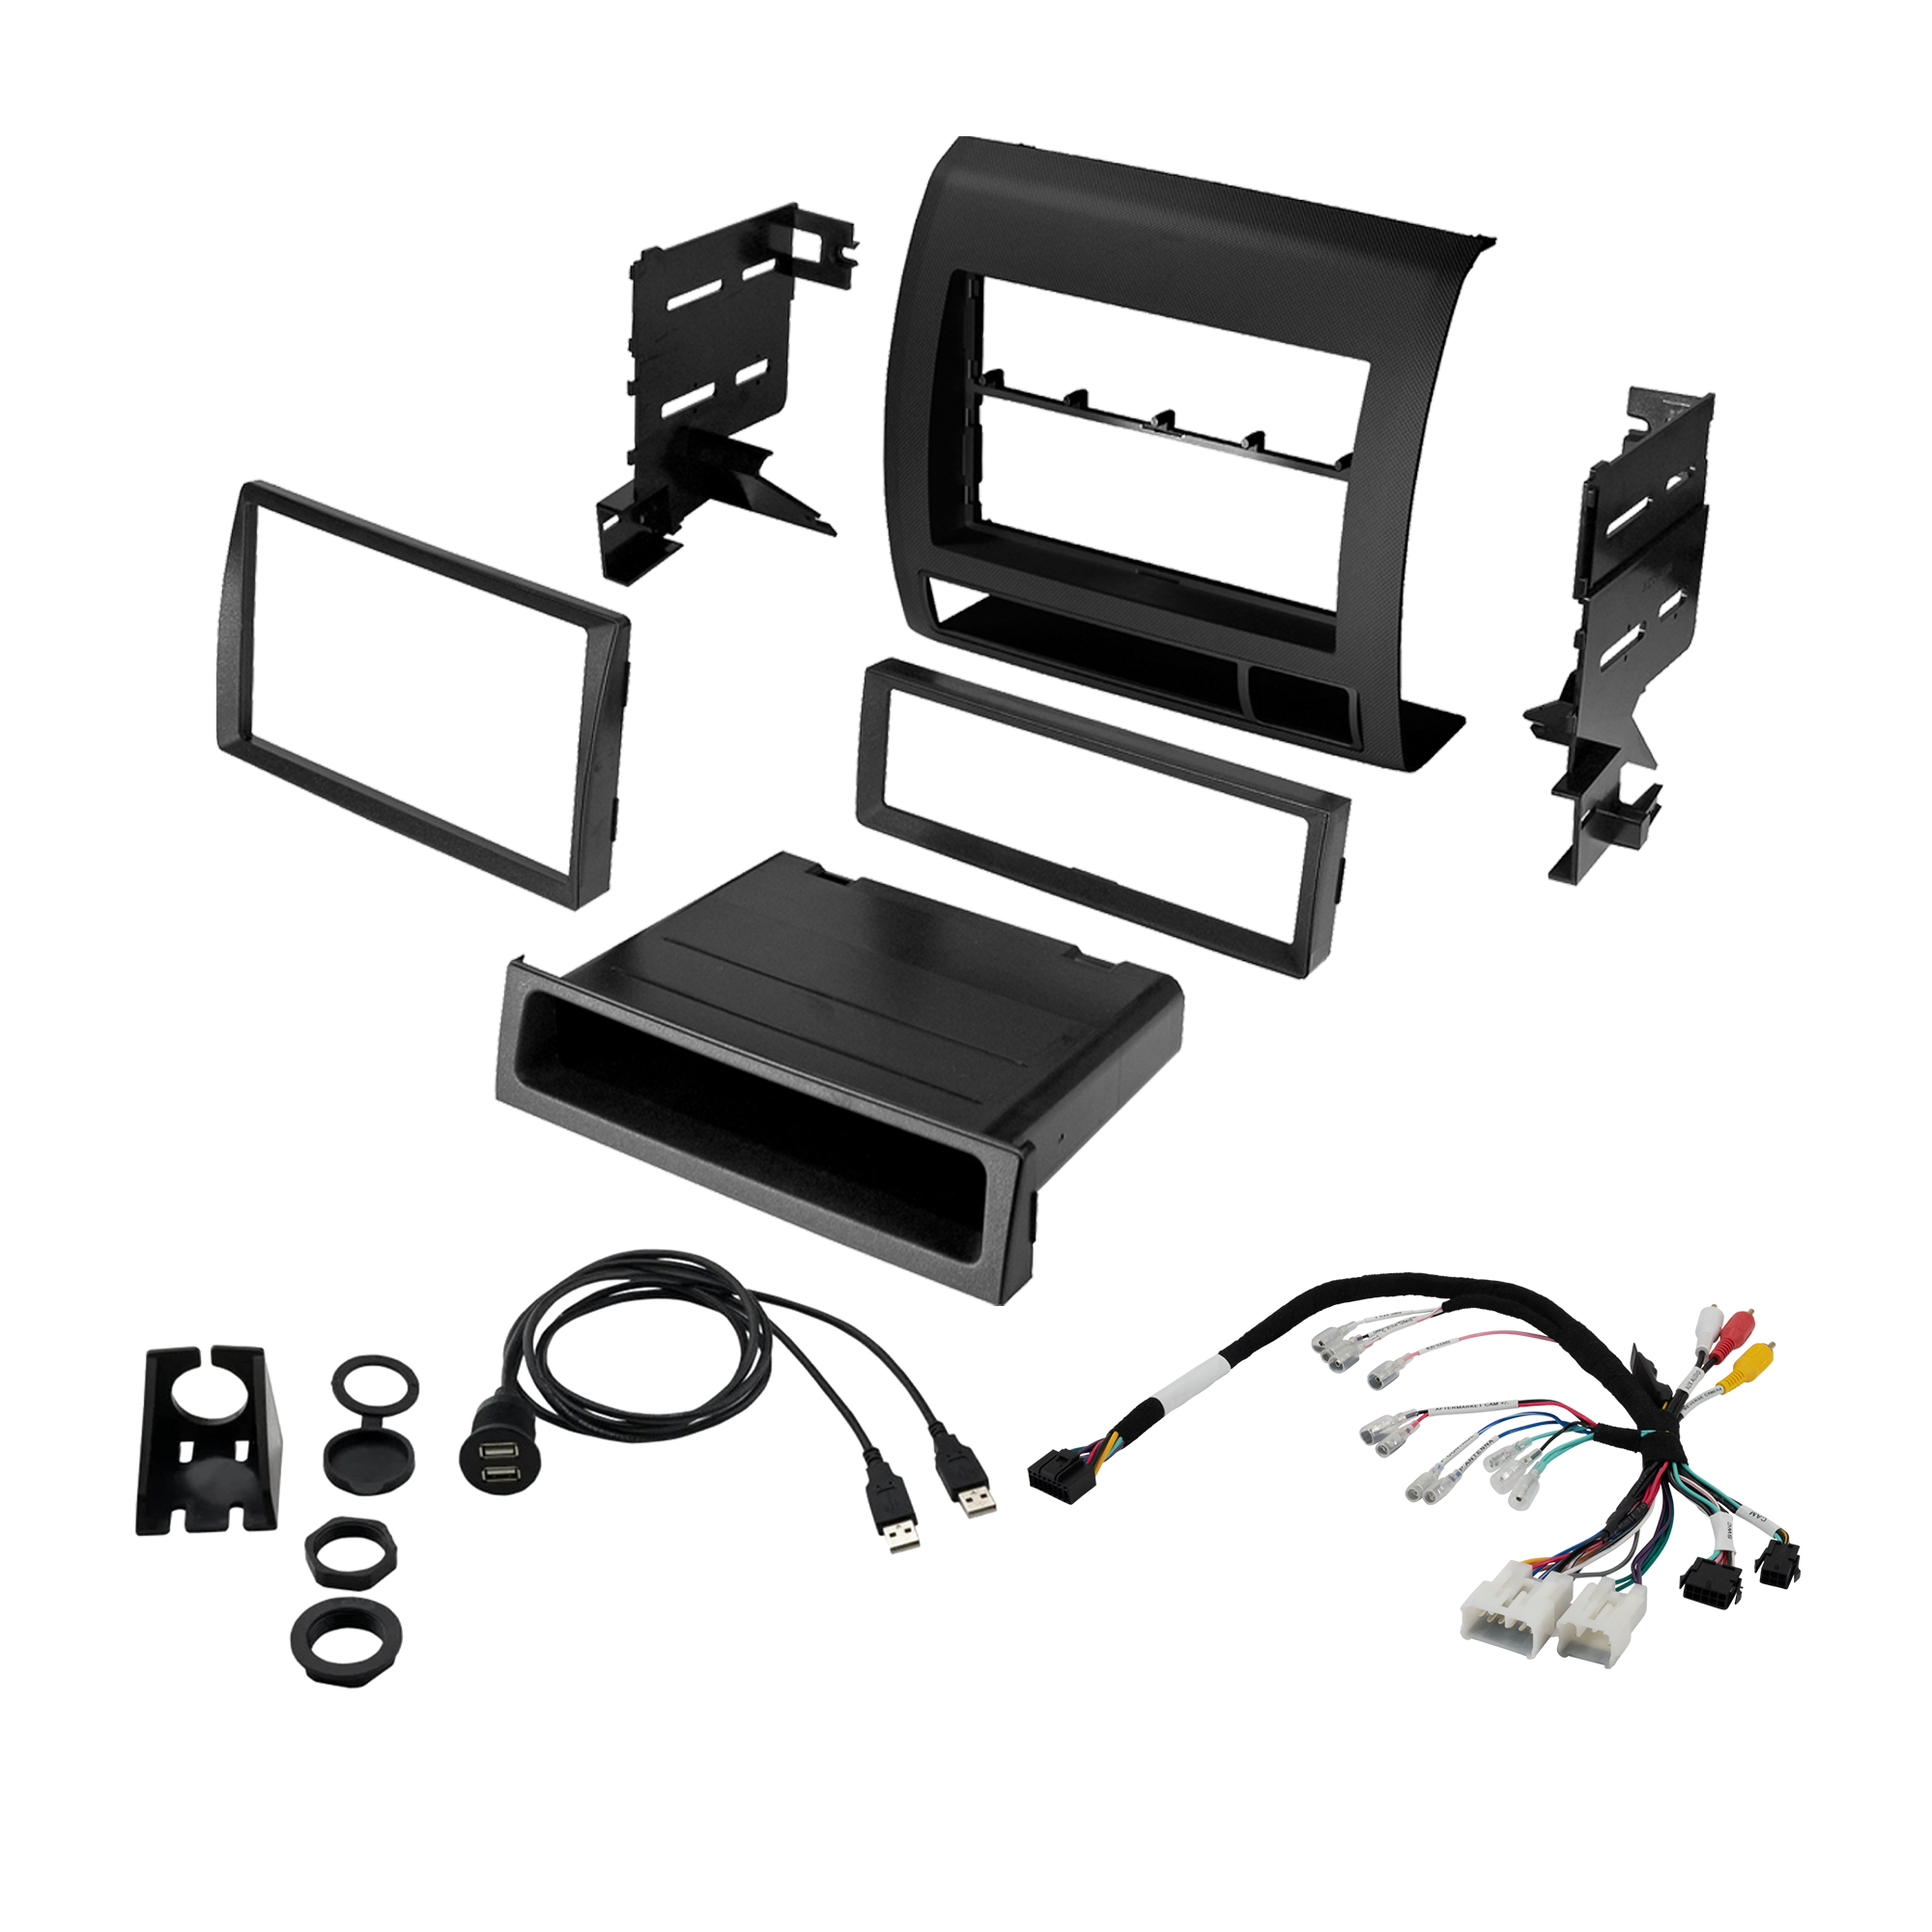 Toyota Specific Plug & Play Harness with Install kit for HEIGH10 